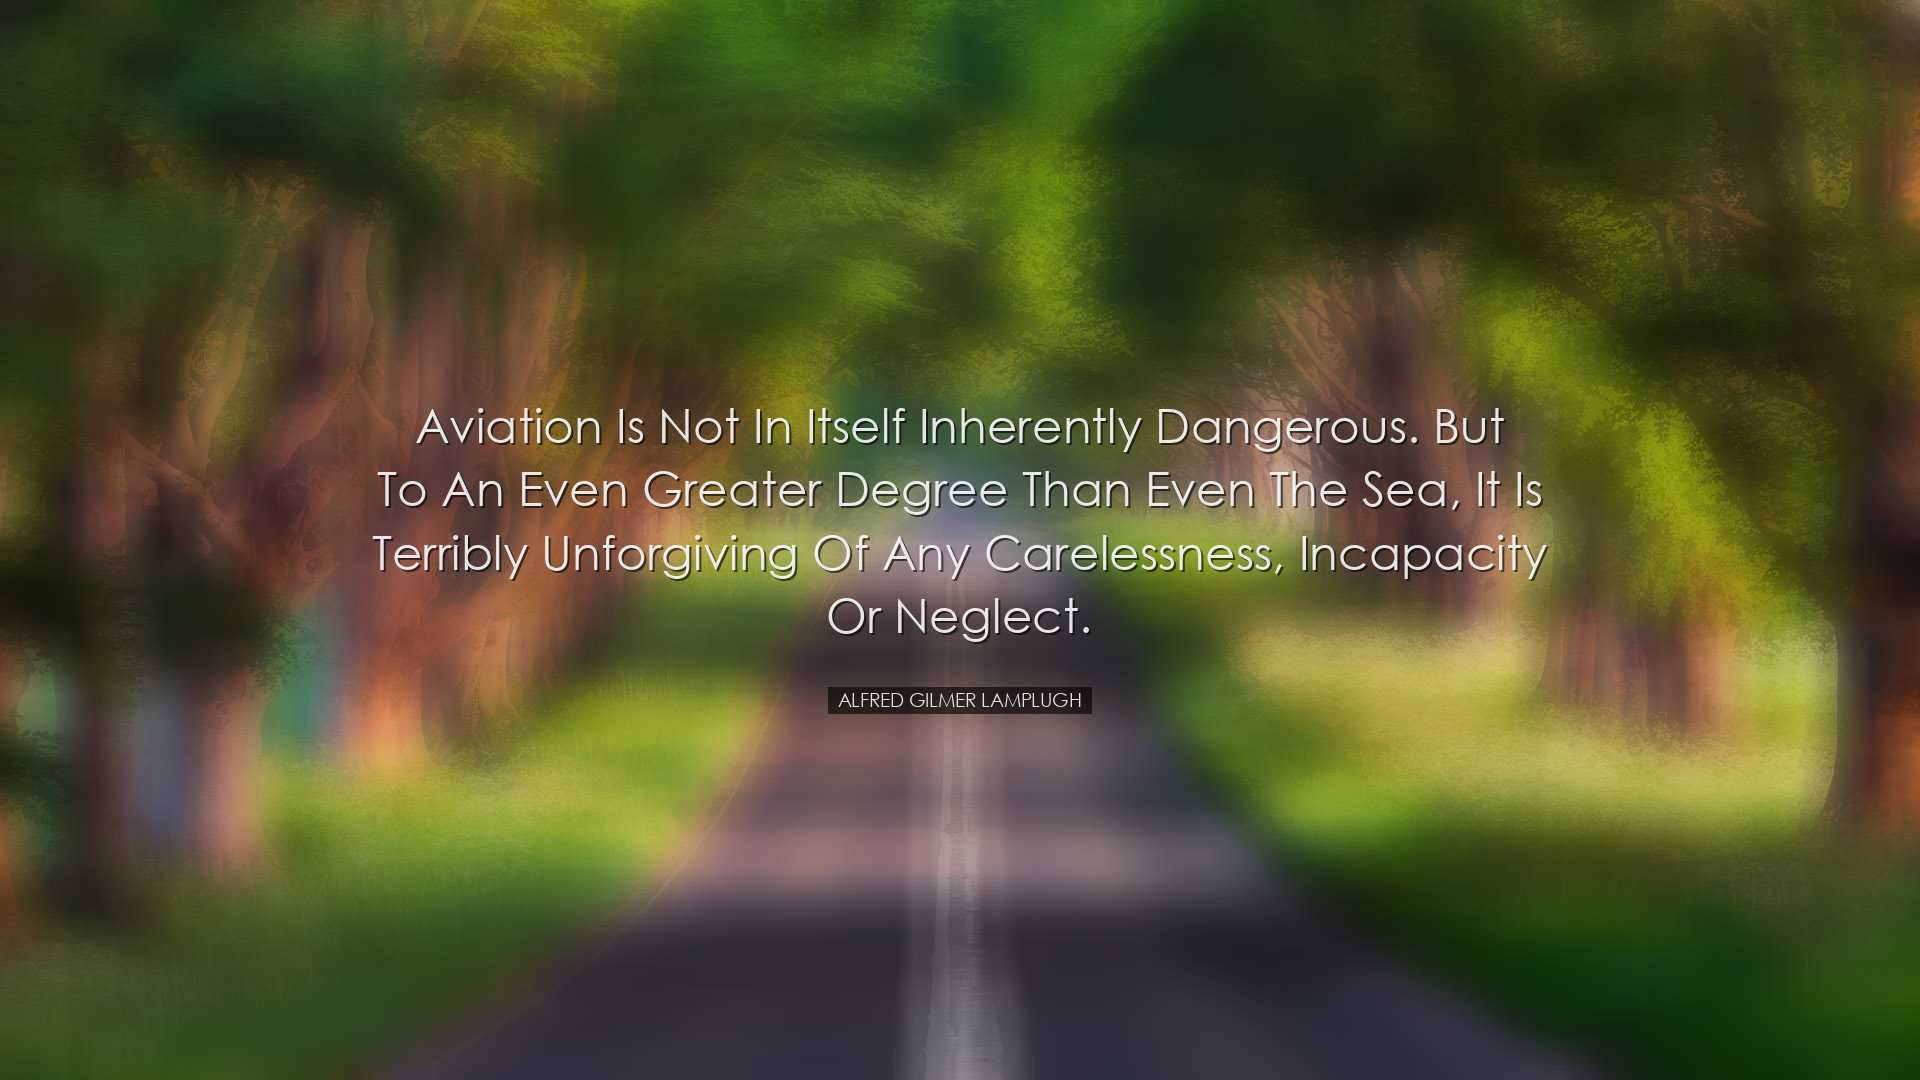 Aviation is not in itself inherently dangerous. But to an even gre